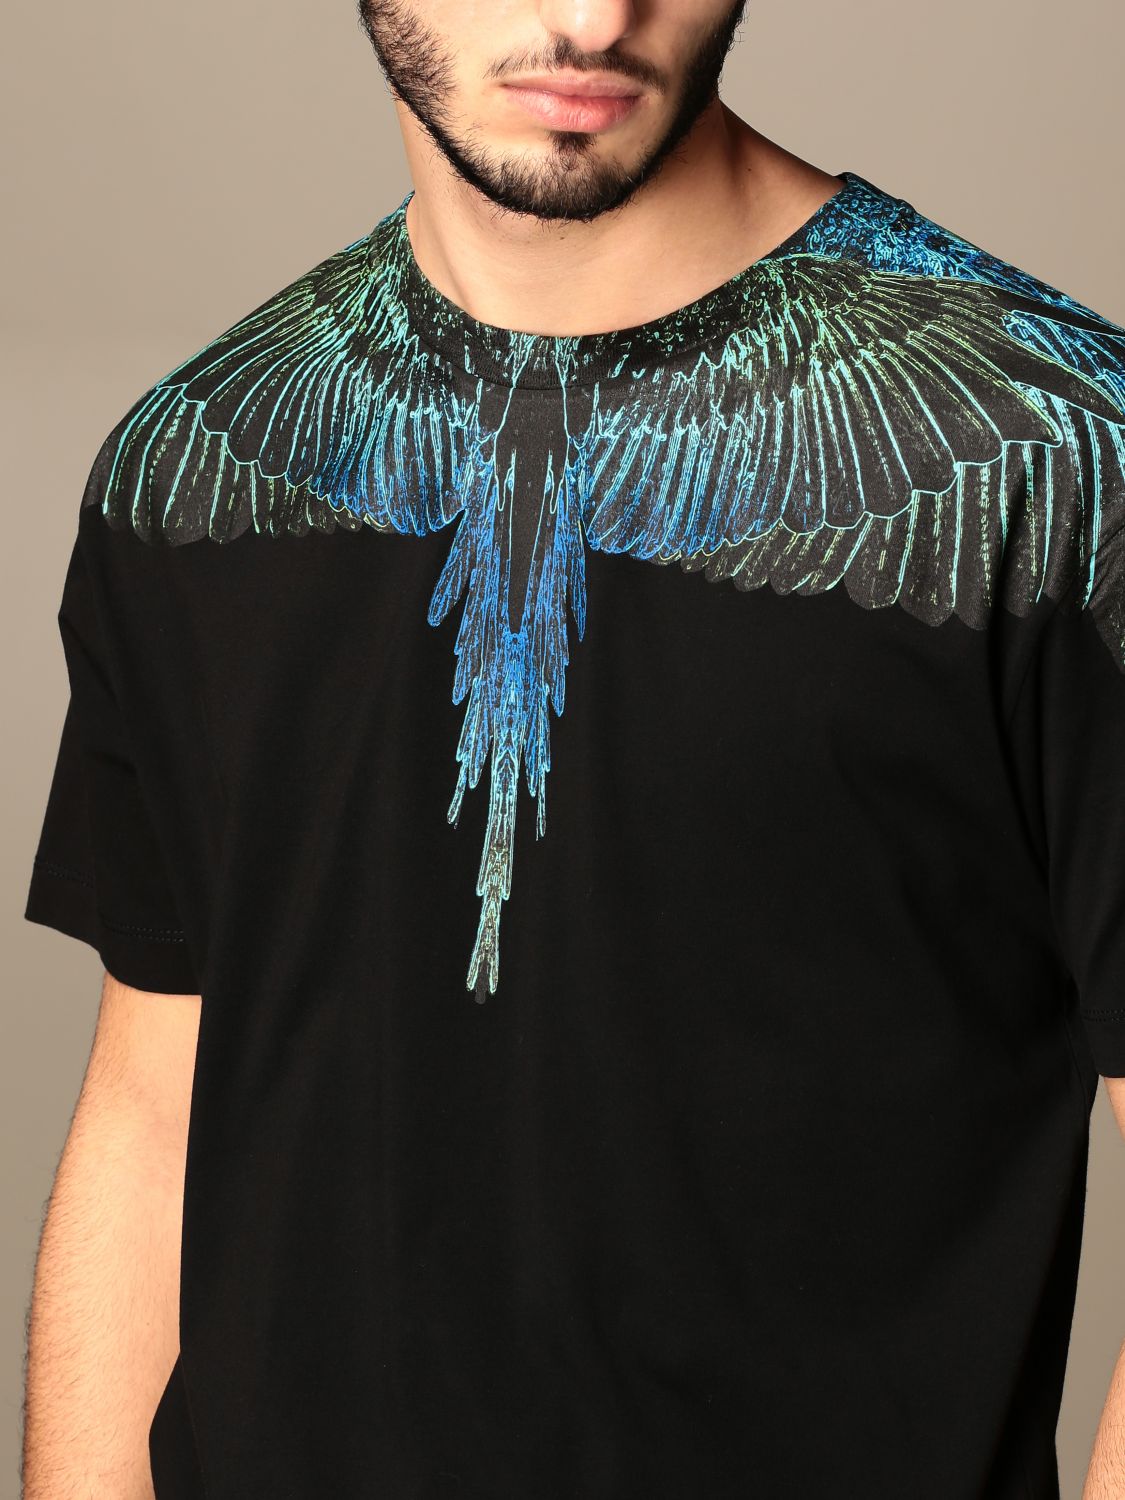 MARCELO BURLON: with bird feathers | T-Shirt Marcelo Burlon Men Black 1 | T-Shirt Marcelo Burlon CMAA018R21JER001 GIGLIO.COM